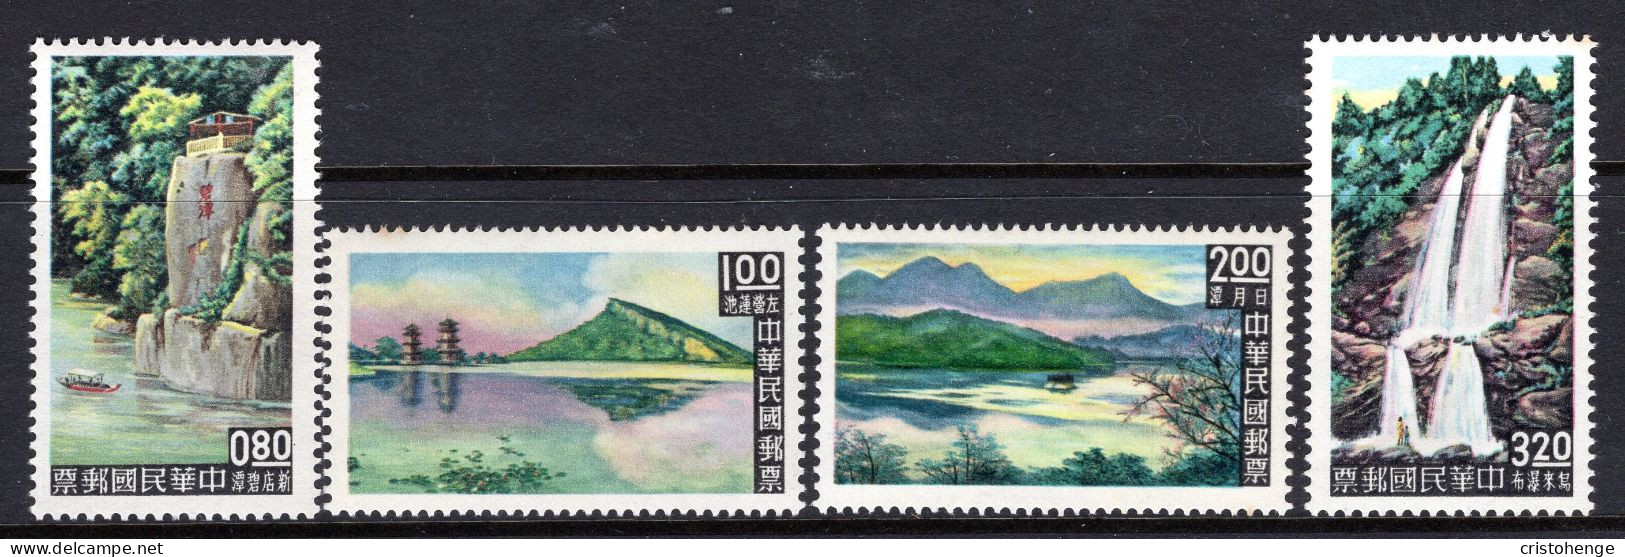 Taiwan 1961 Taiwan Scenery Set LHM (SG 416-419) - Unused Stamps